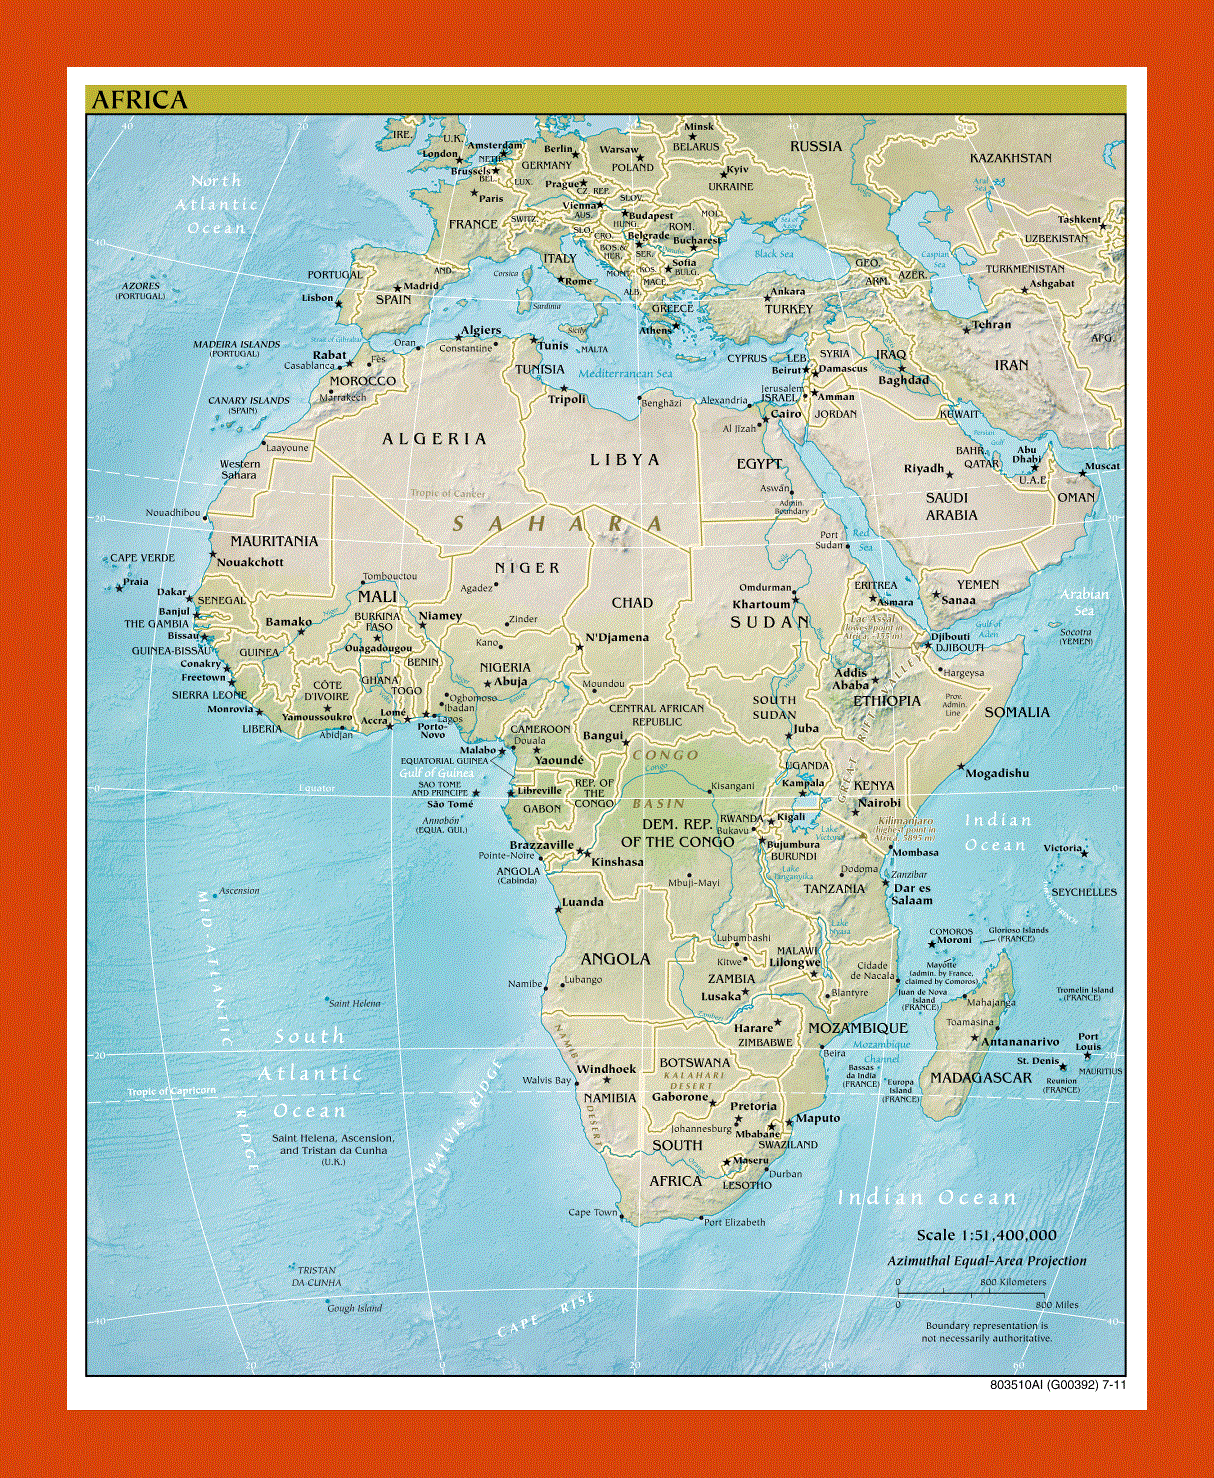 Political map of Africa - 2011